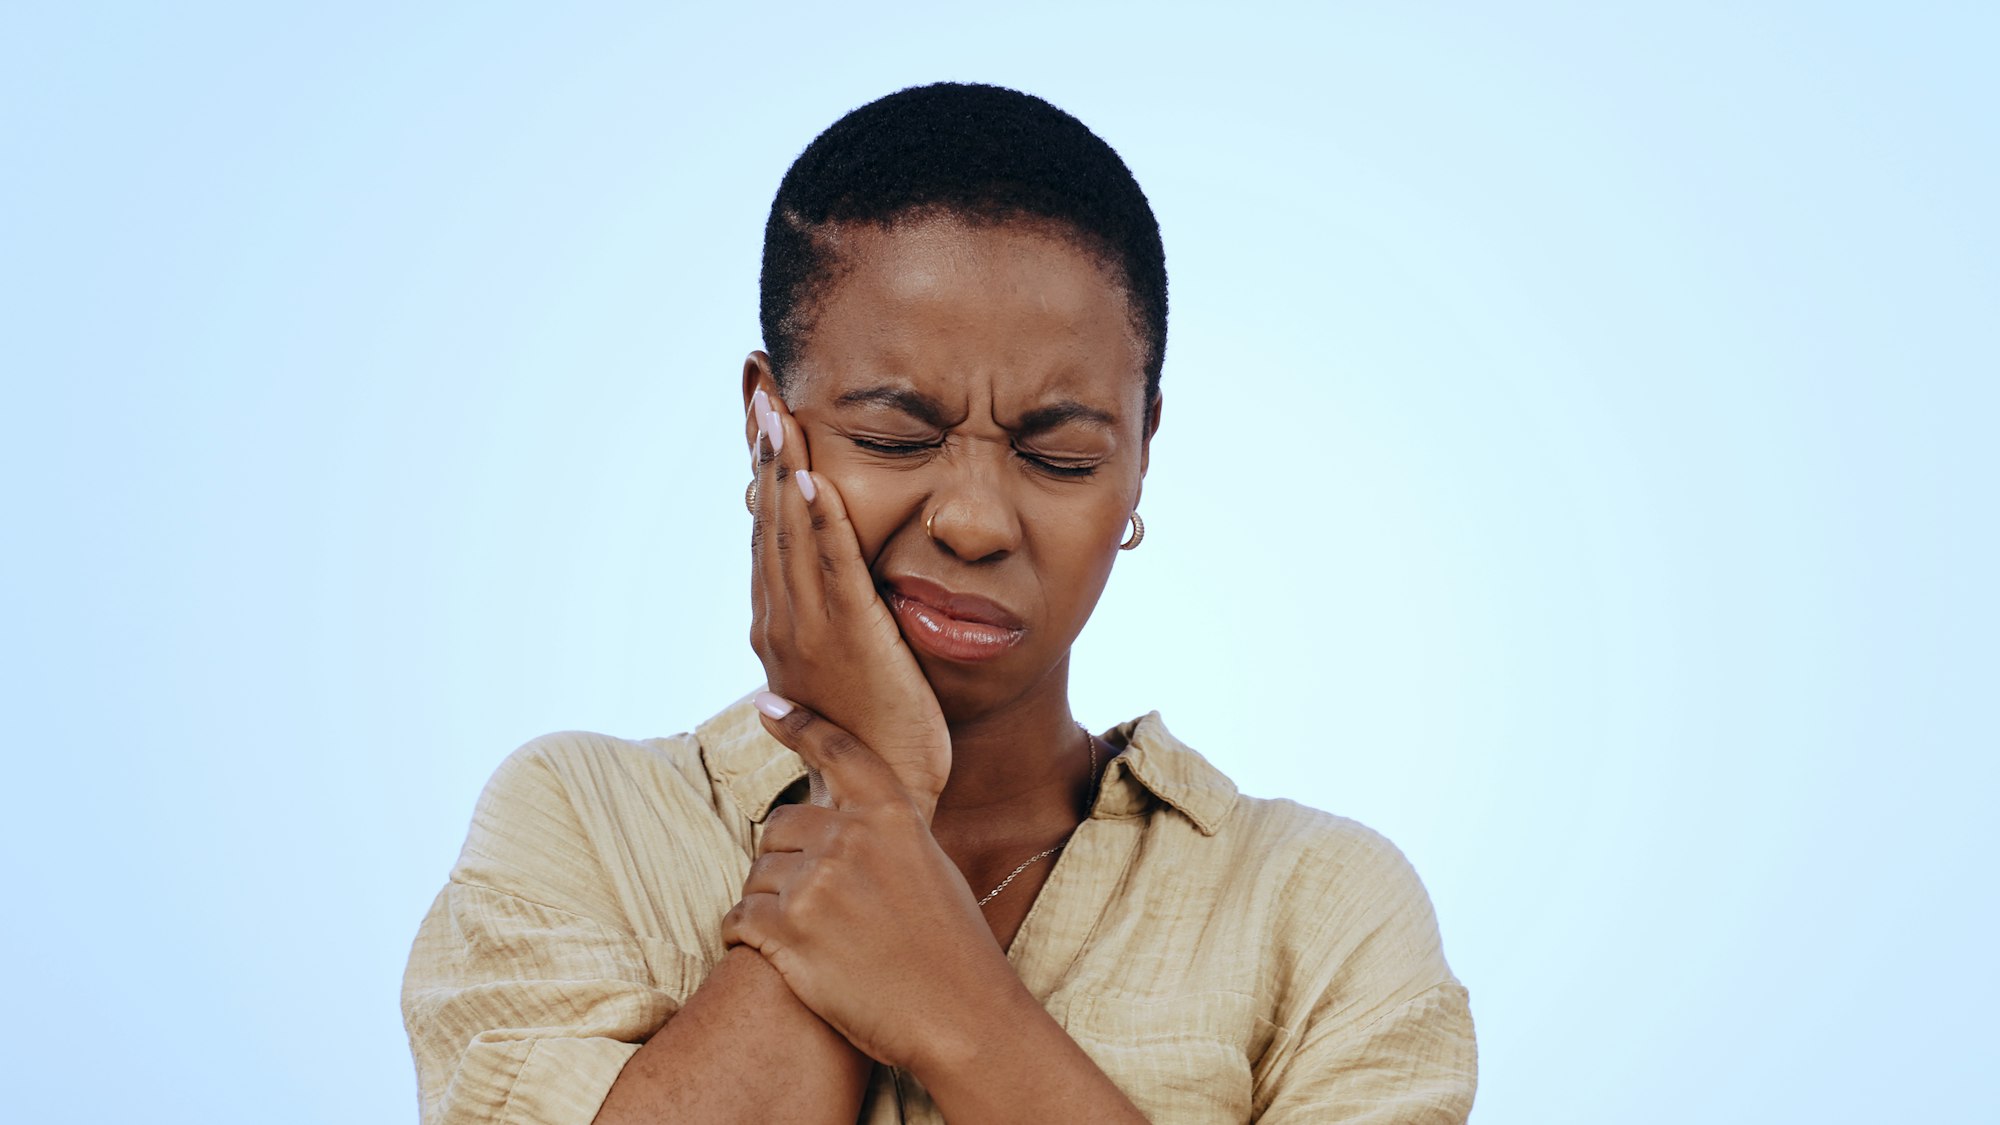 African American woman rubbing her jaw in pain, illustrating the discomfort of Swollen Gums treated at Schlueter Periodontics.